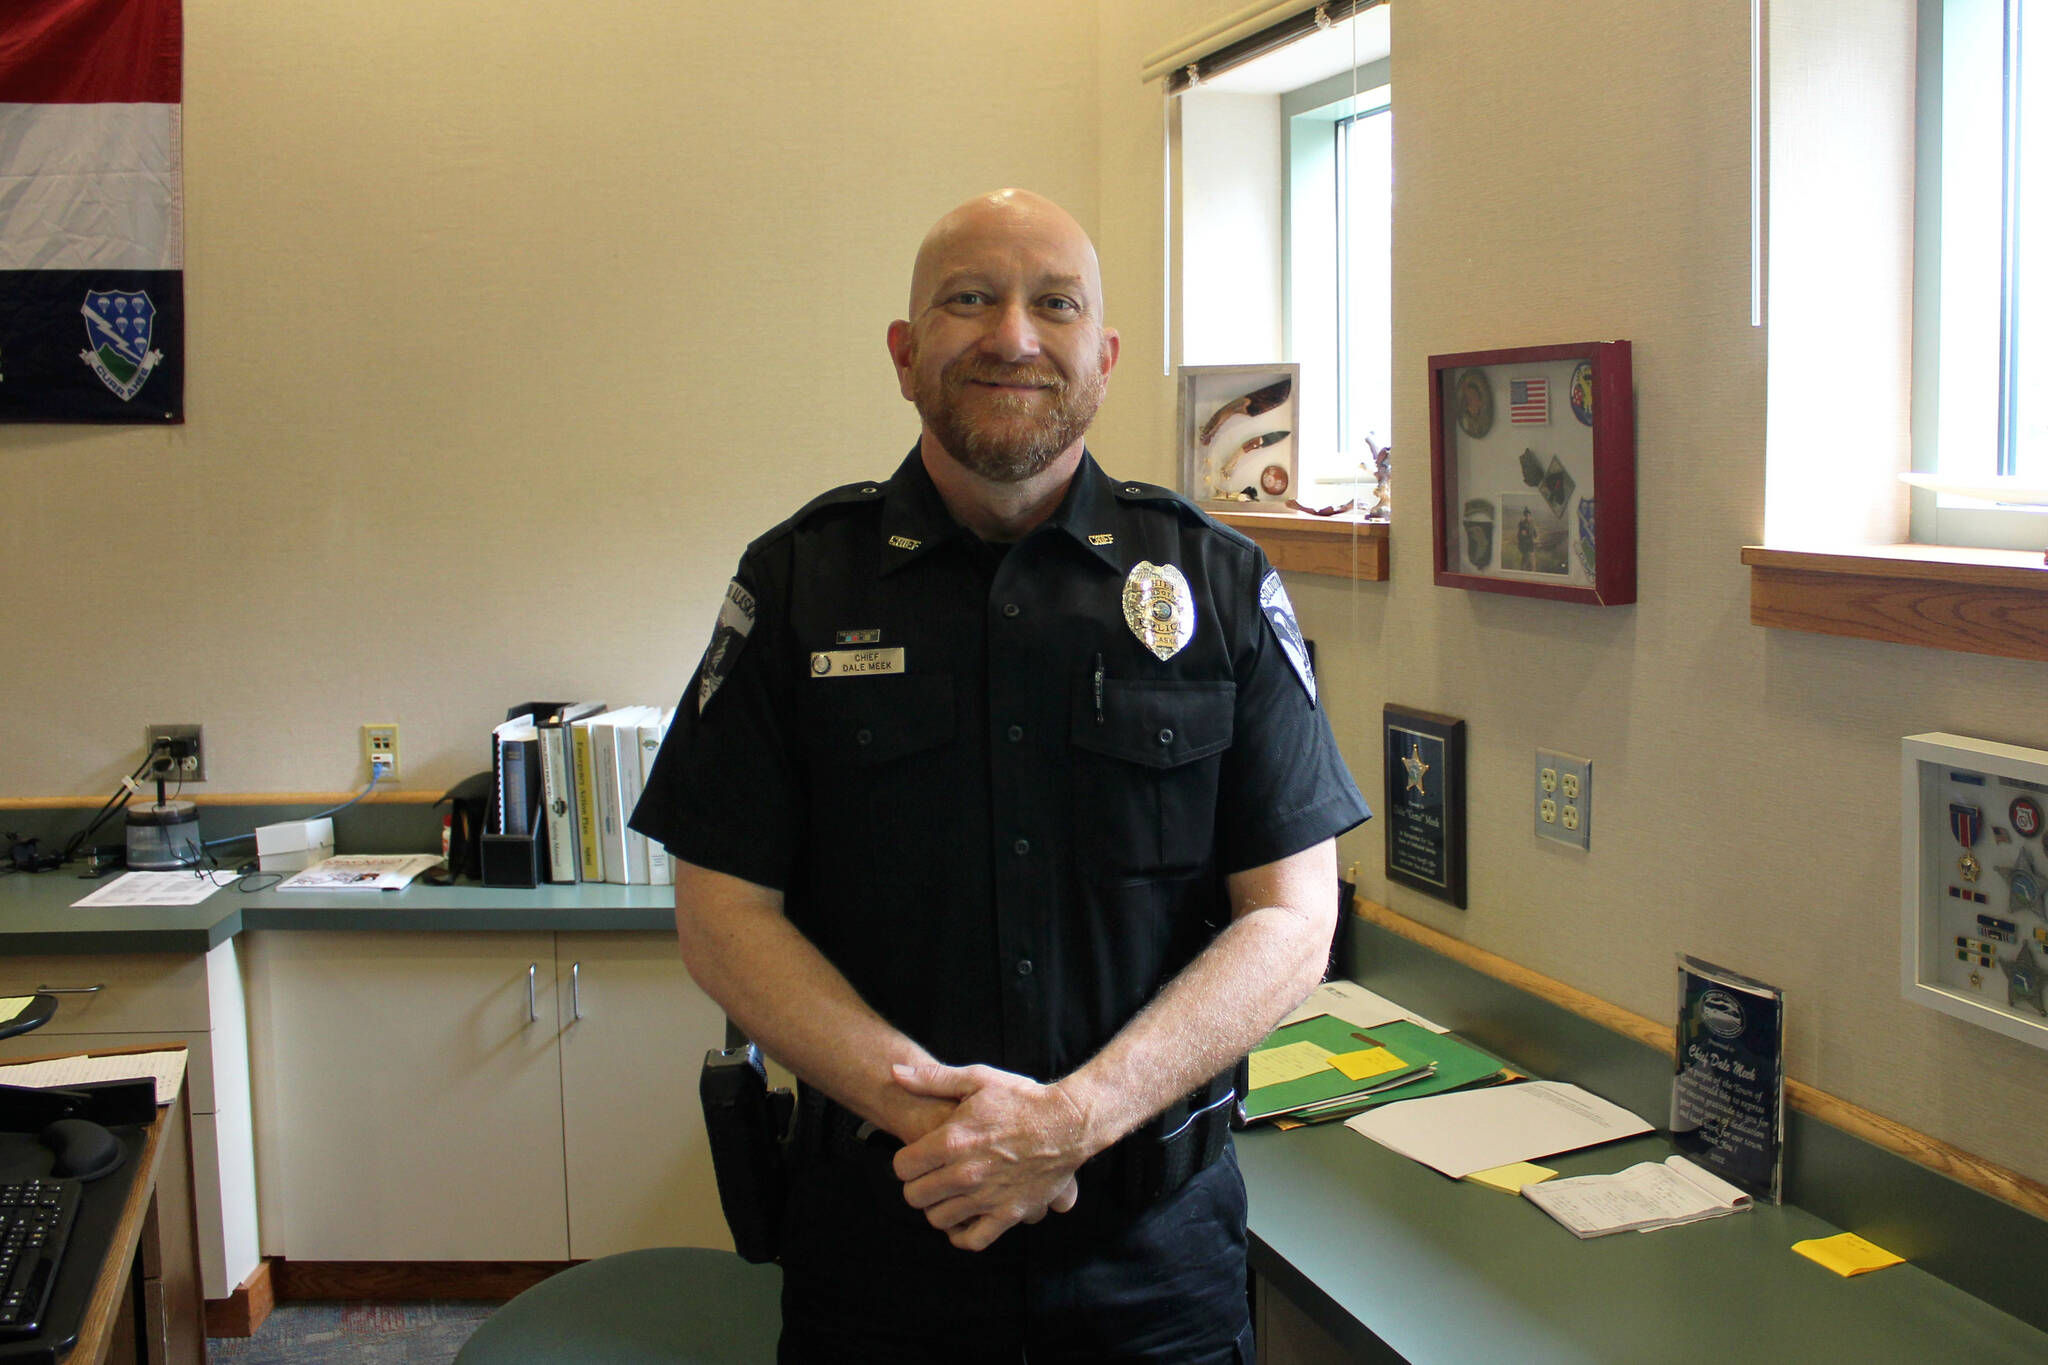 Soldotna Police Chief Dale “Gene” Meek stands in his office on Tuesday, Aug. 30, 2022, in Soldotna, Alaska. (Ashlyn O’Hara/Peninsula Clarion)